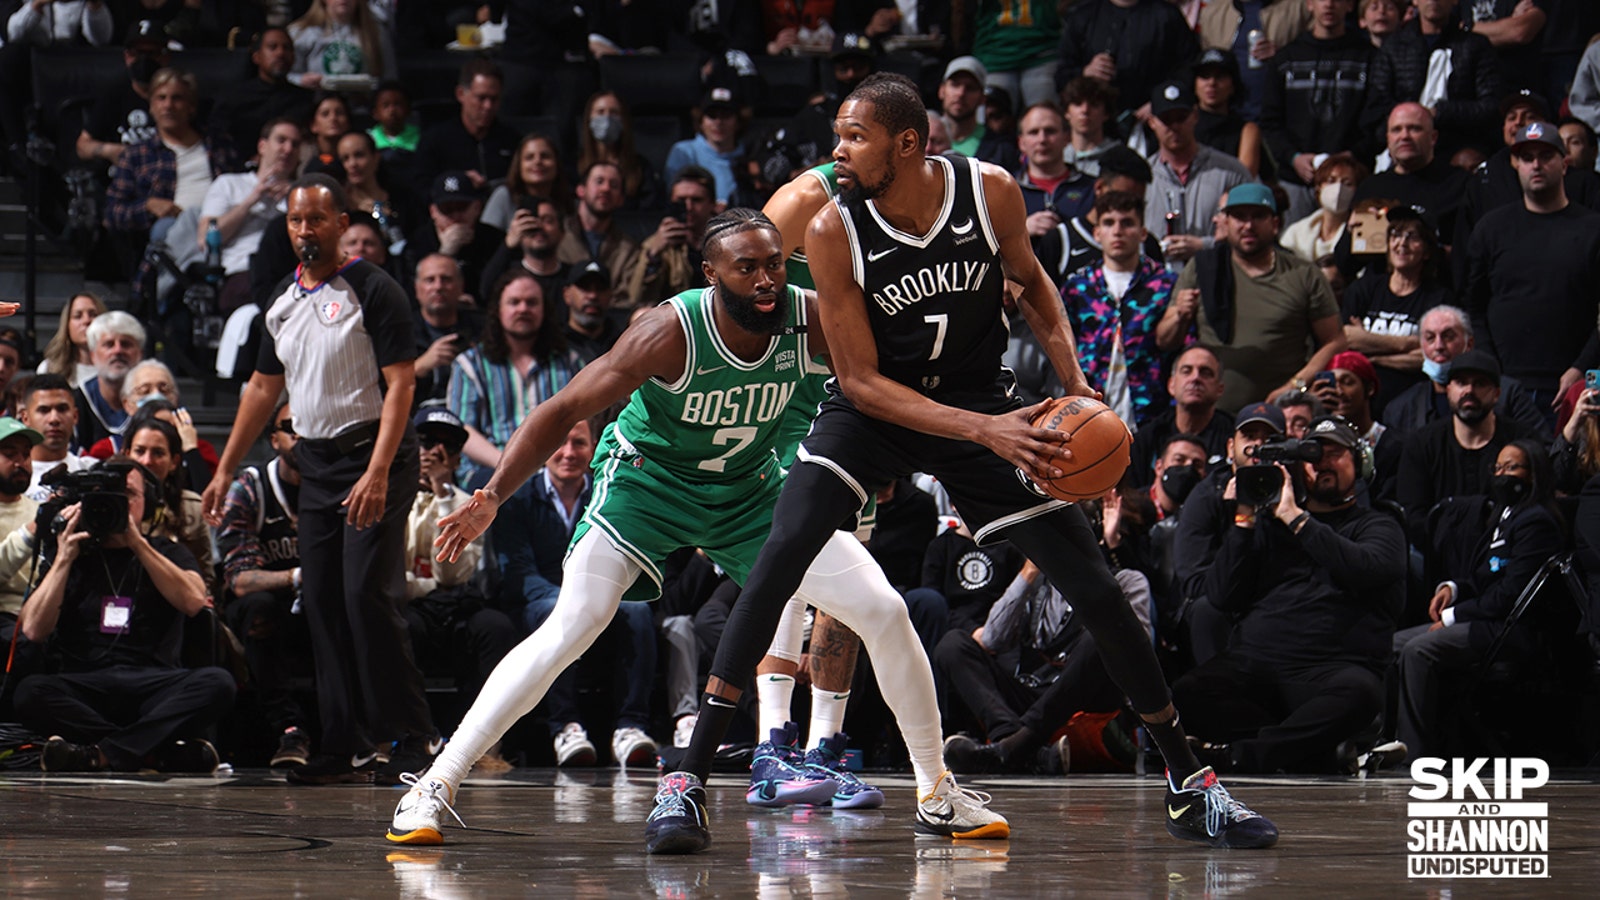 Celtics offered Jaylen Brown, Derrick White and draft compensation to Nets for Kevin Durant